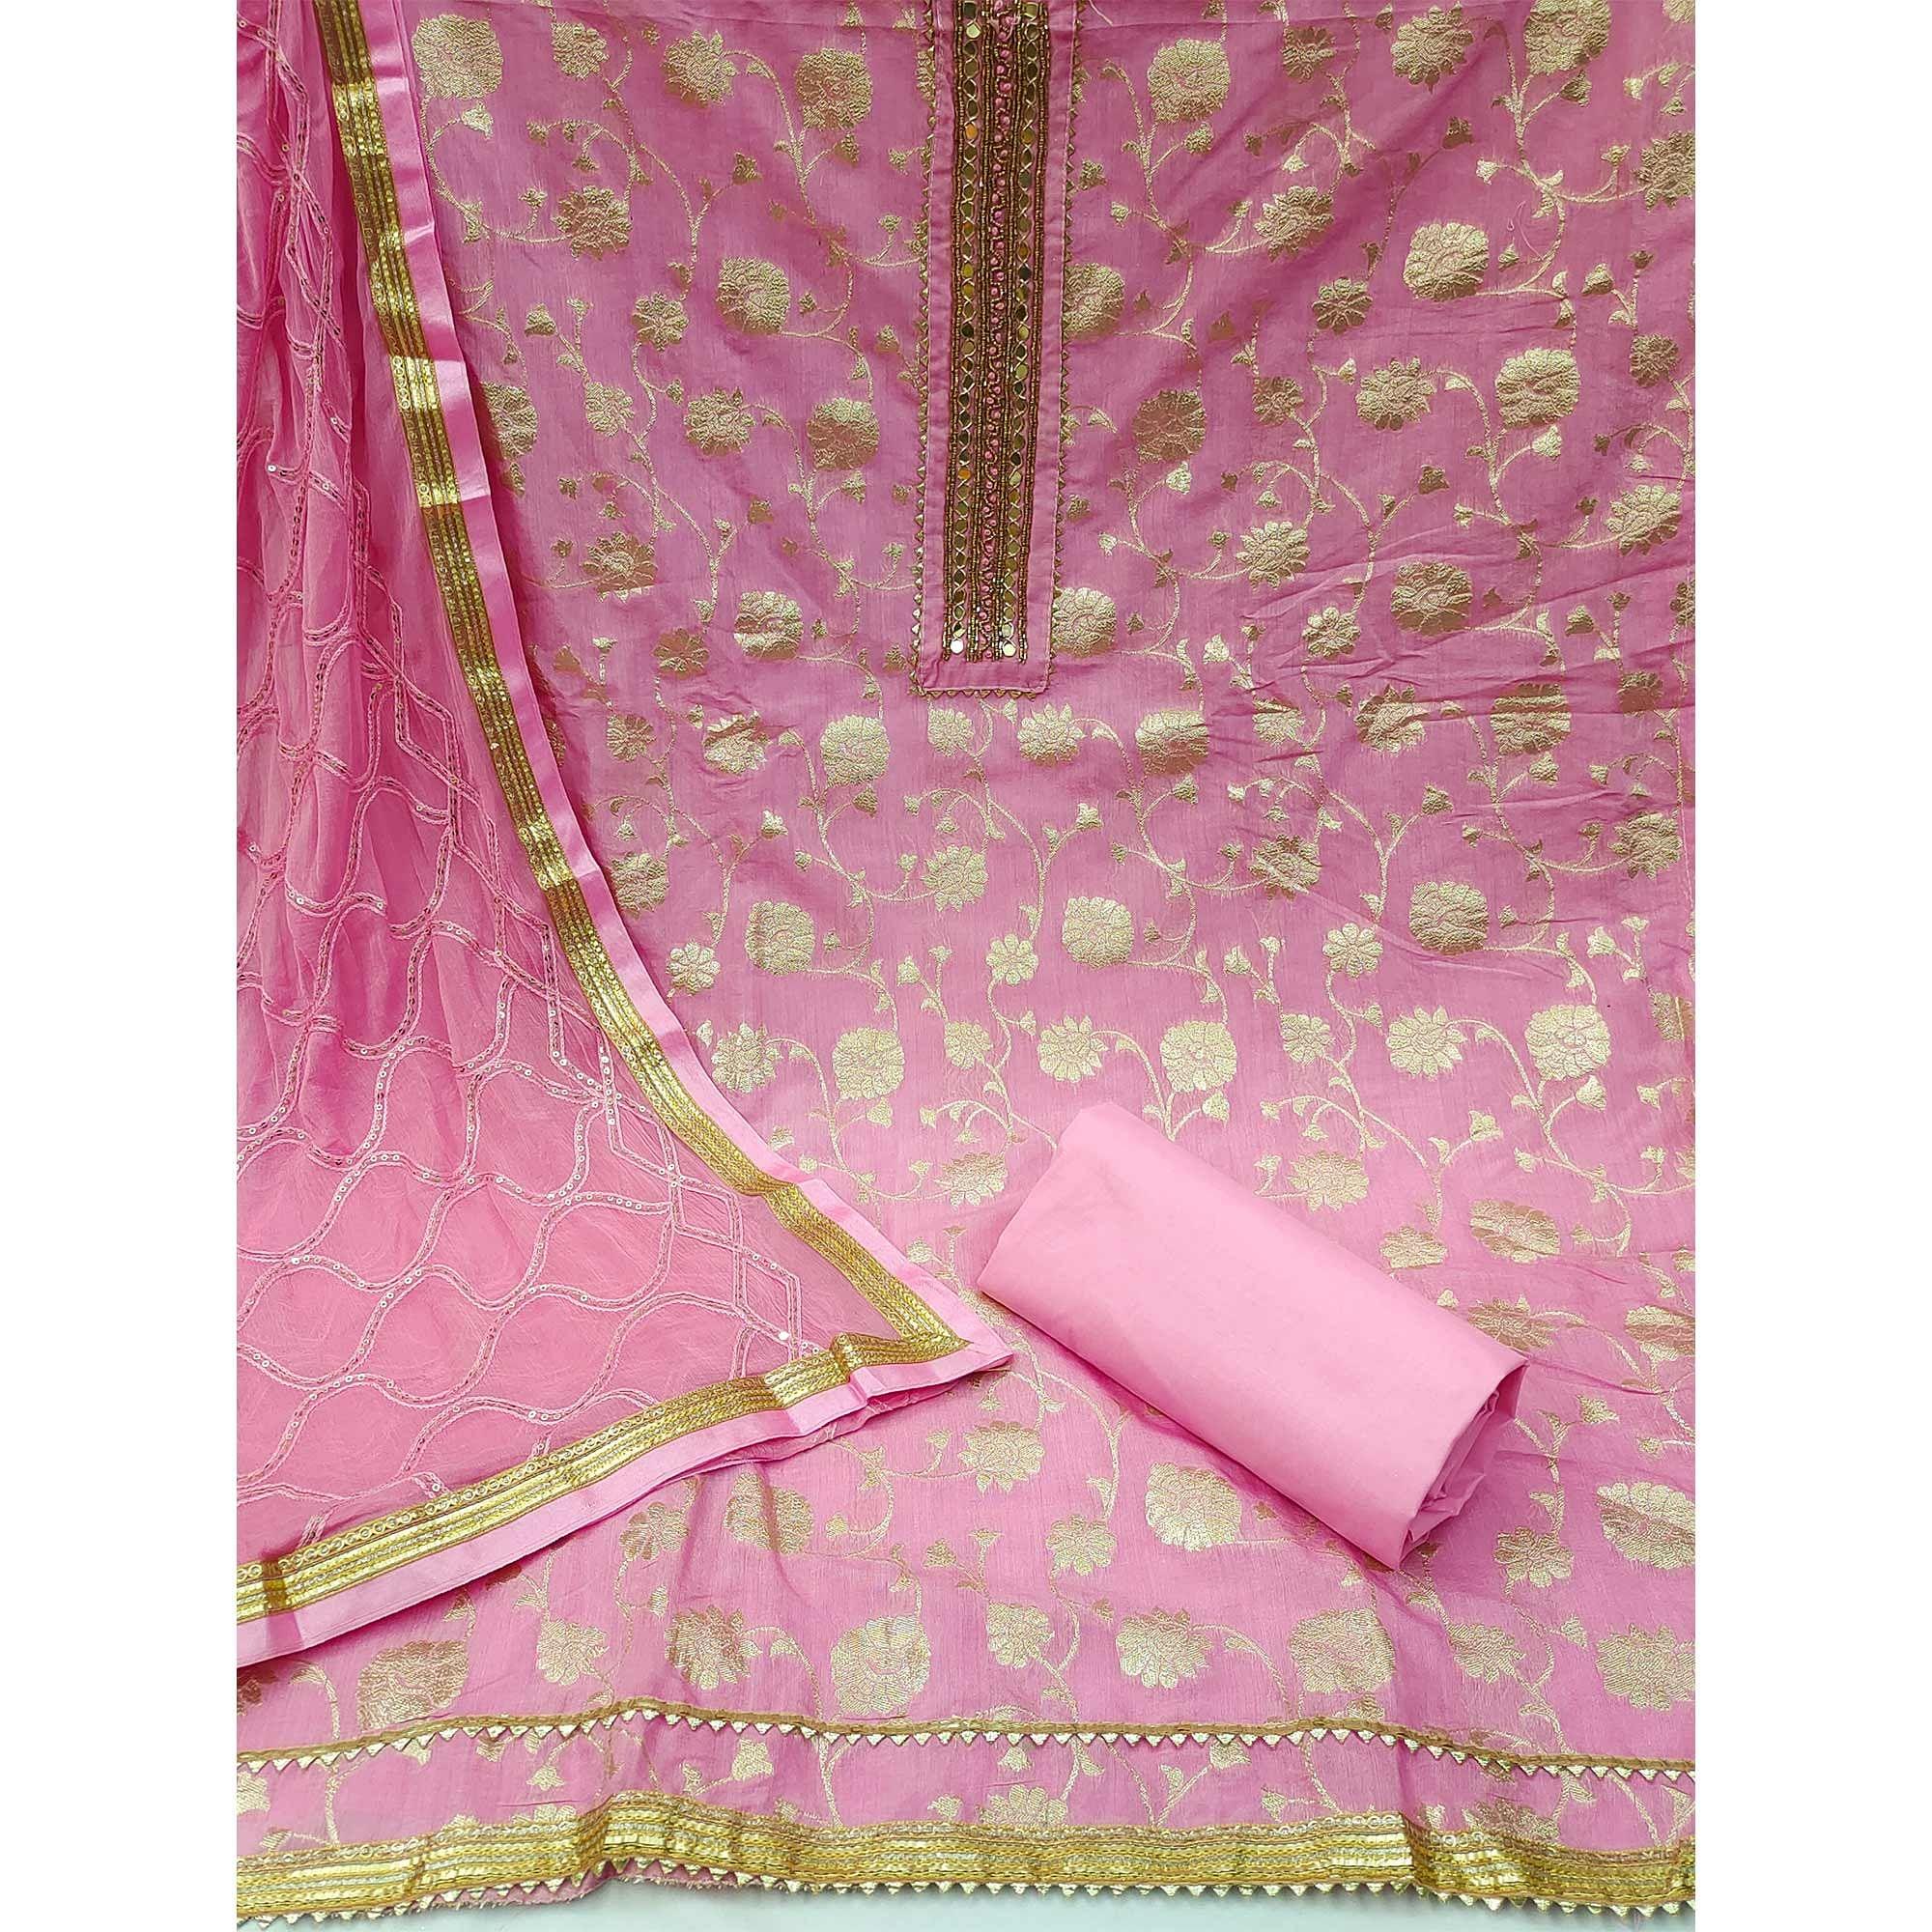 Pink Festive Wear Woven With Embellished Jacquard Dress Material - Peachmode